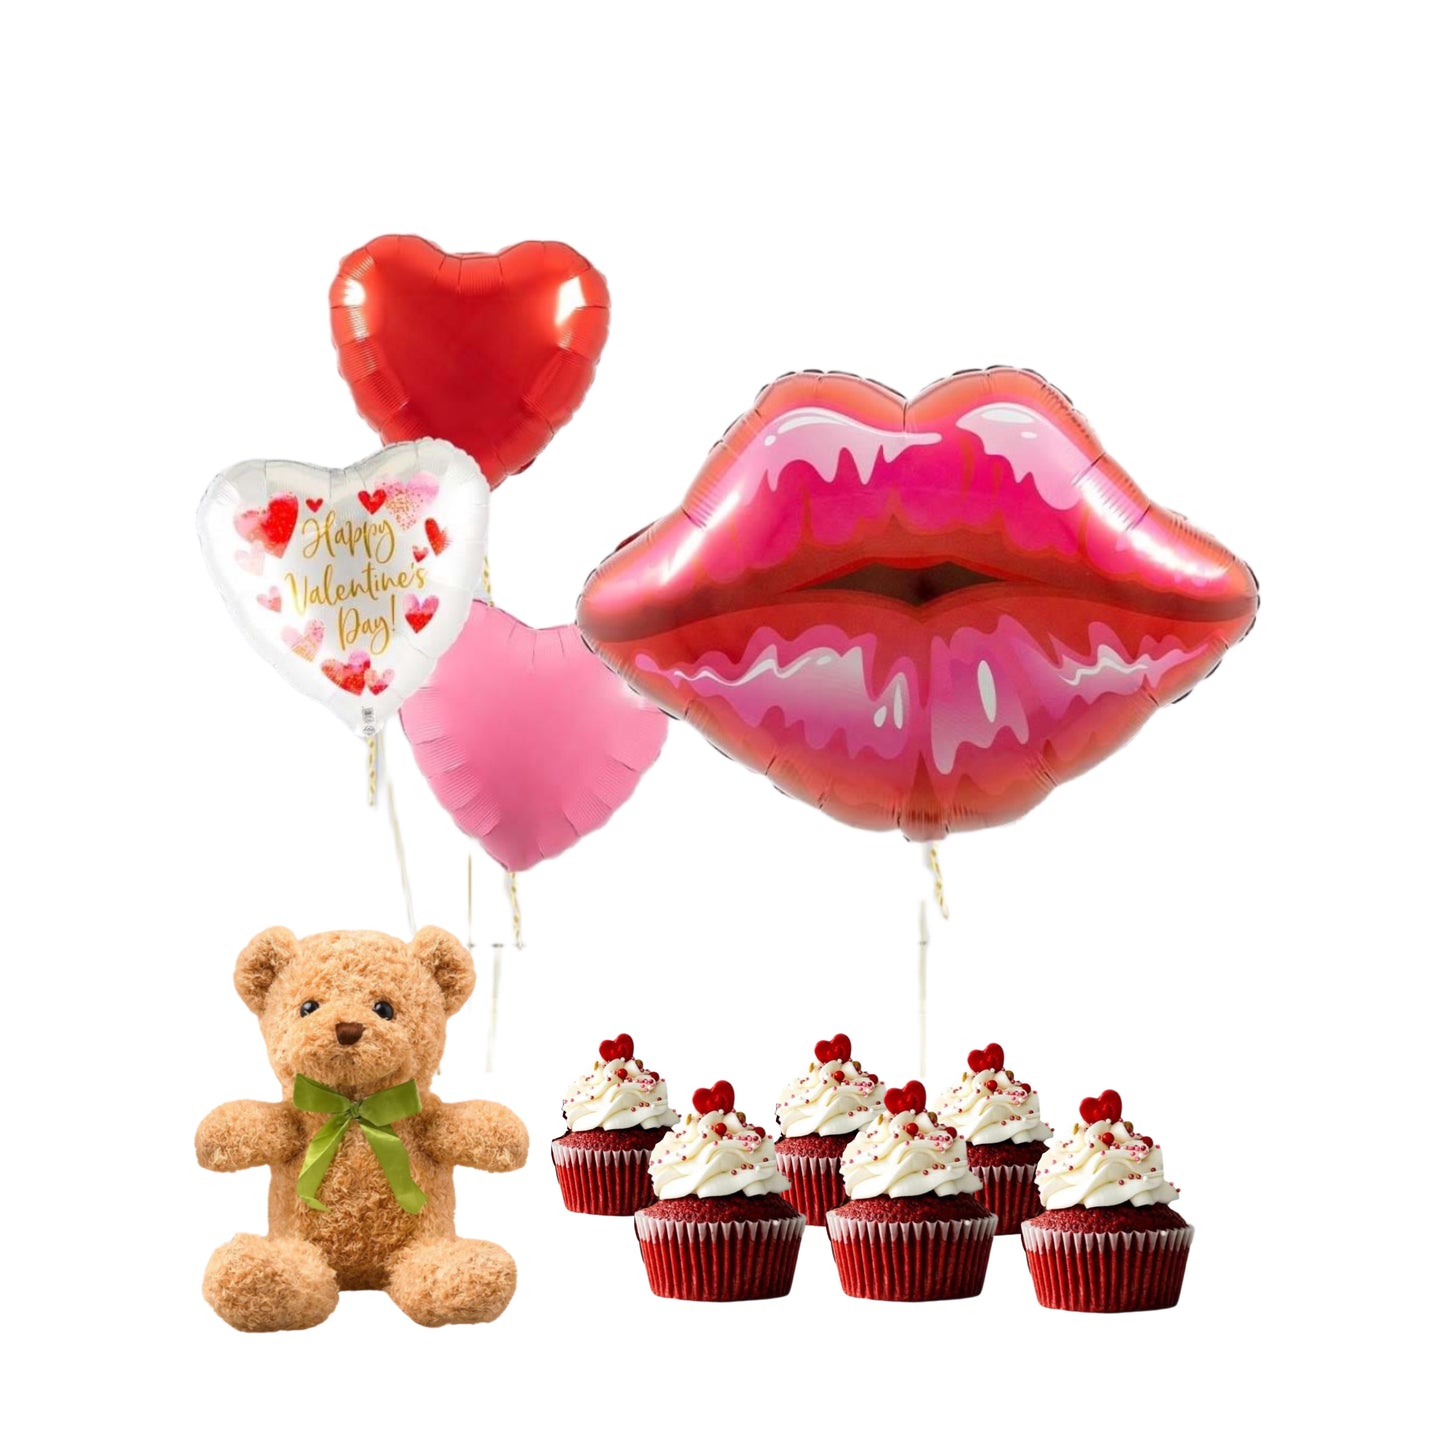 Valentine’s Day Package- 6 Cupcakes with teddy bear and heart bouquet